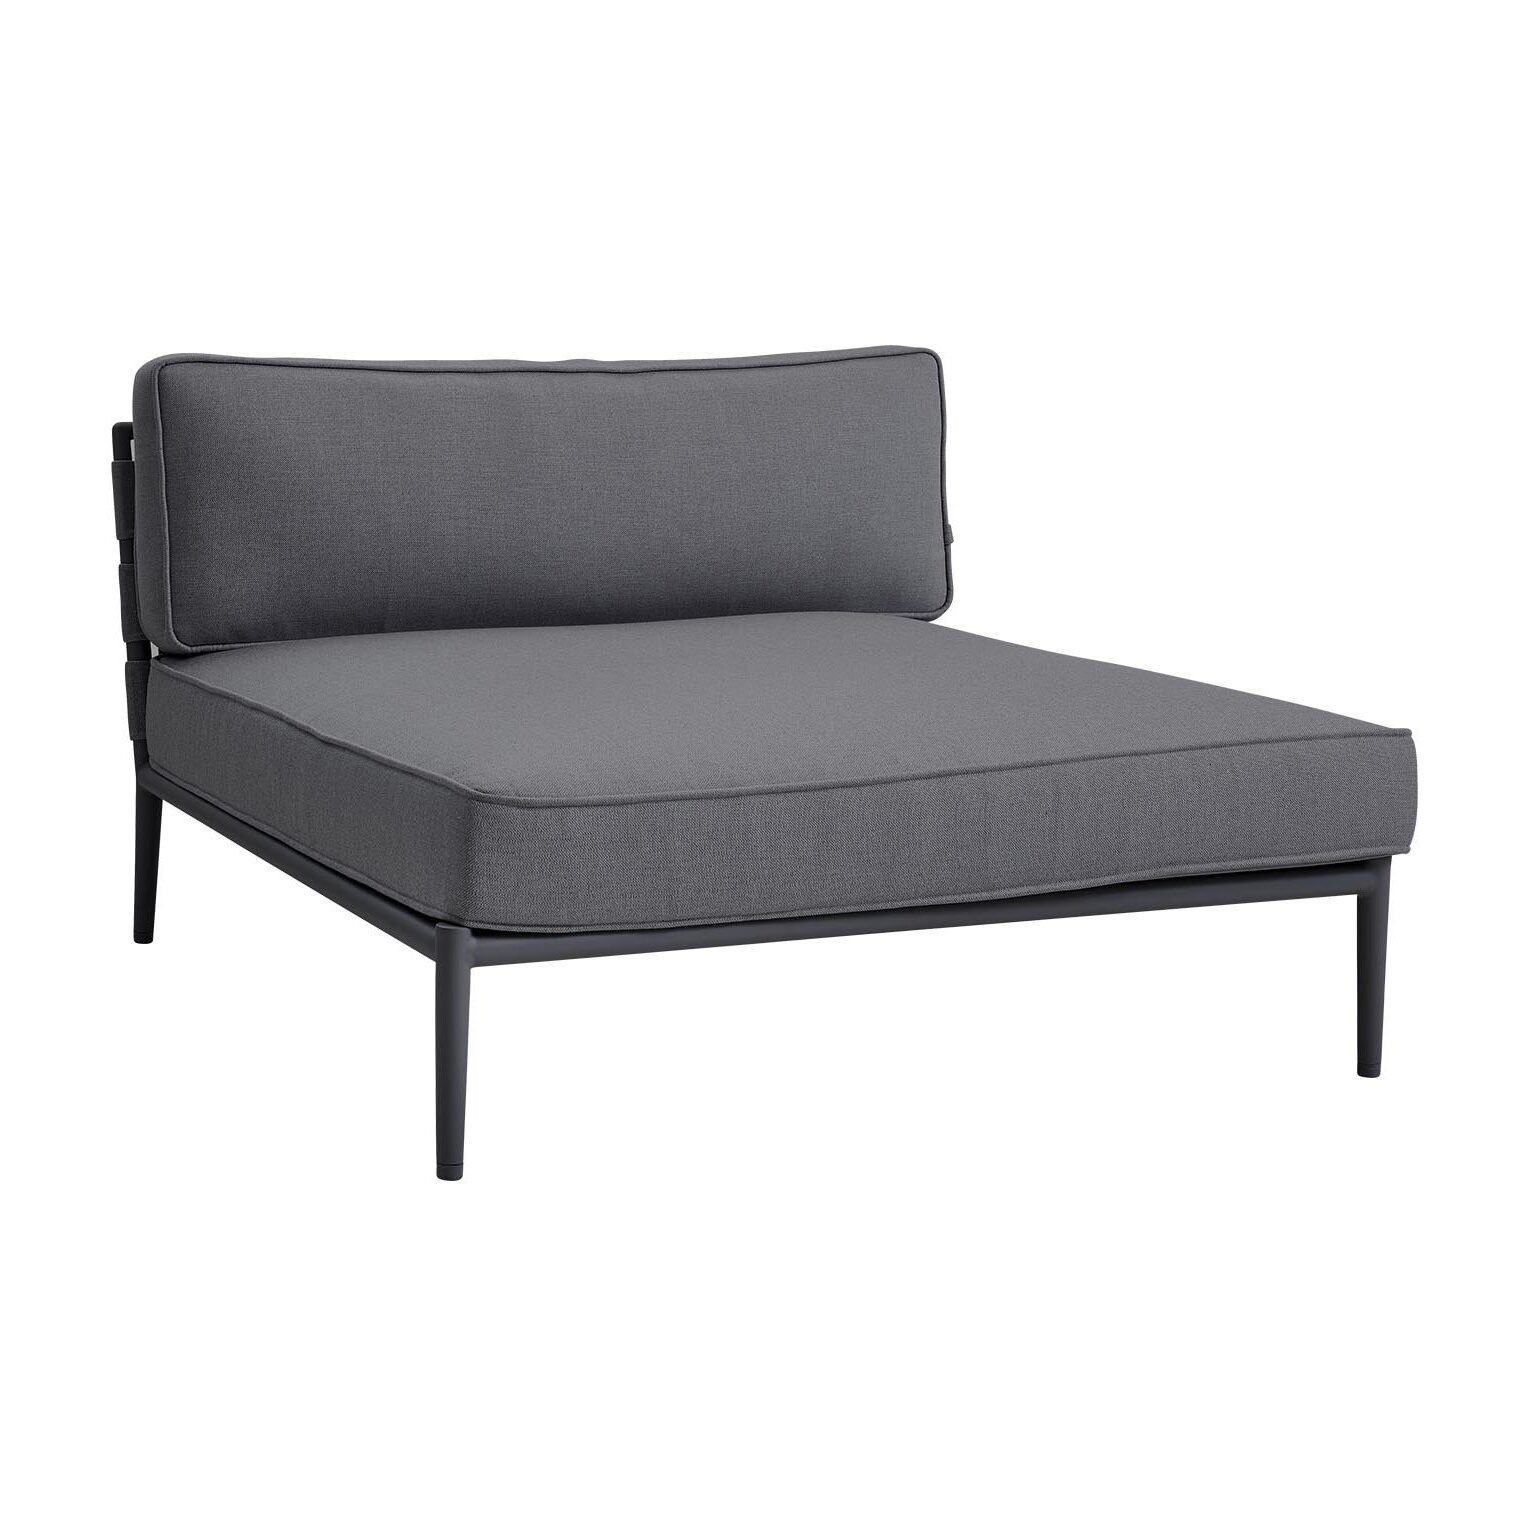 Cane-line "Conic" Daybed mit AirTouch-Kissen grau